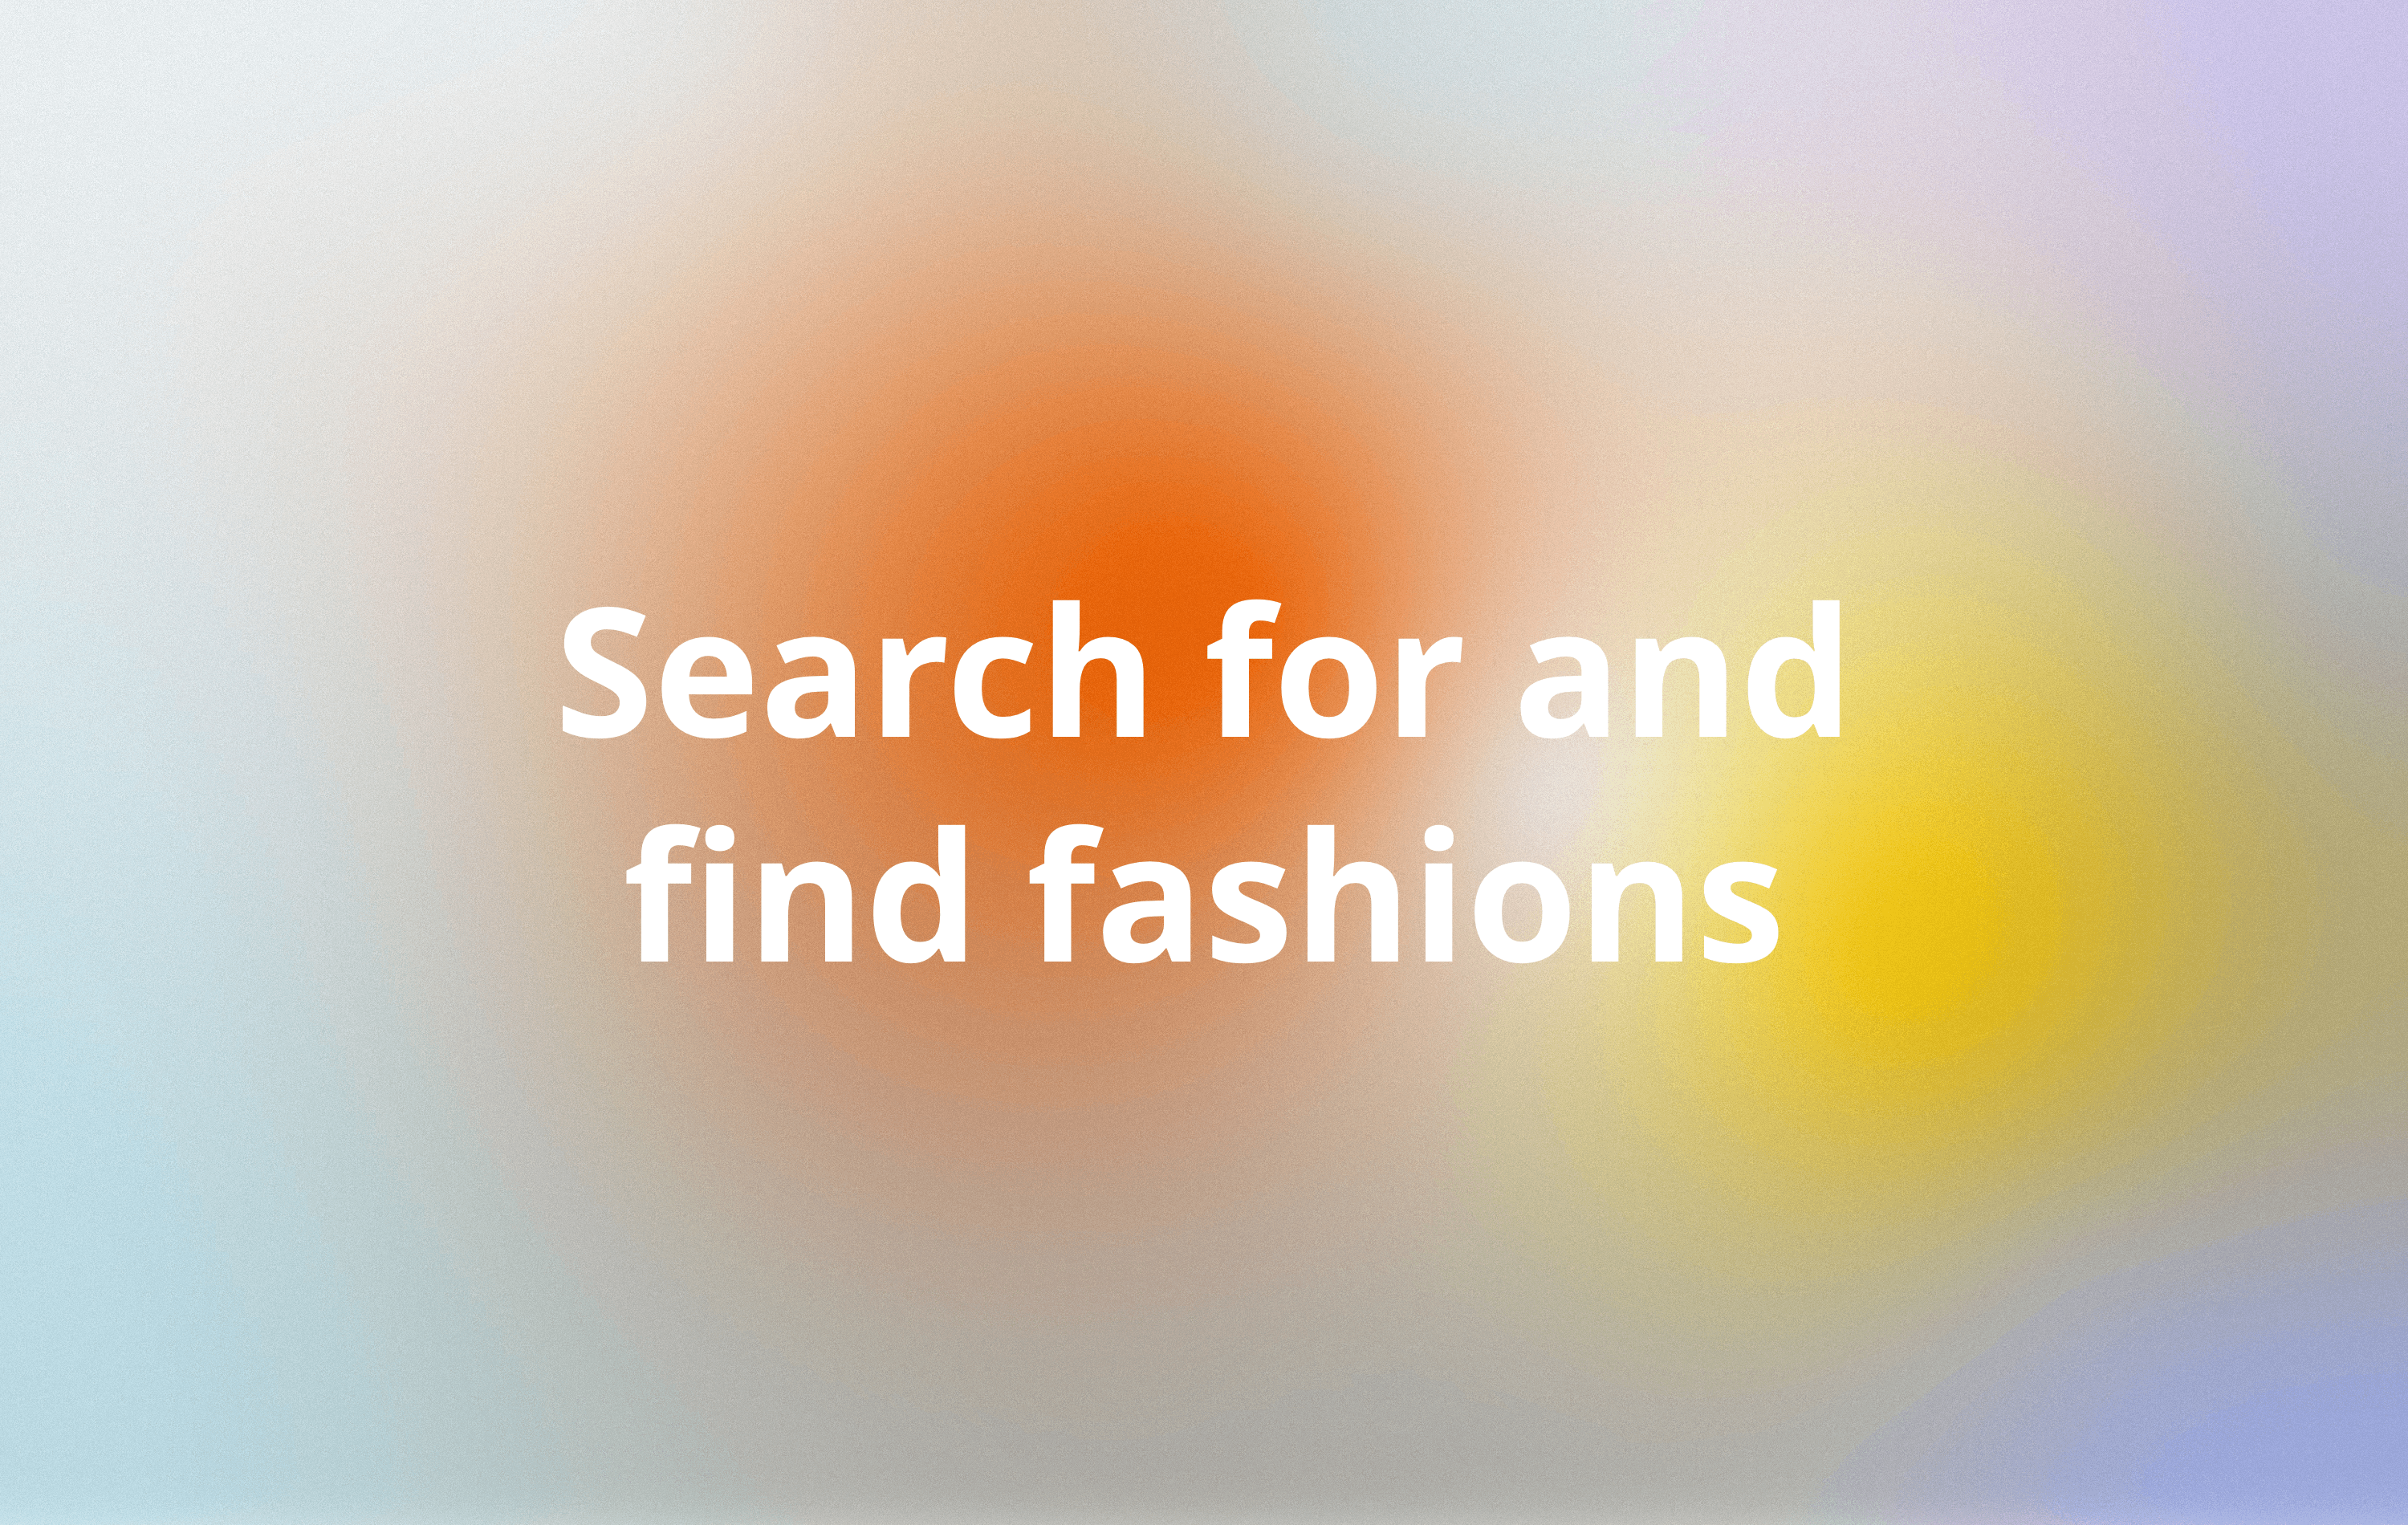 Search for and find fashions